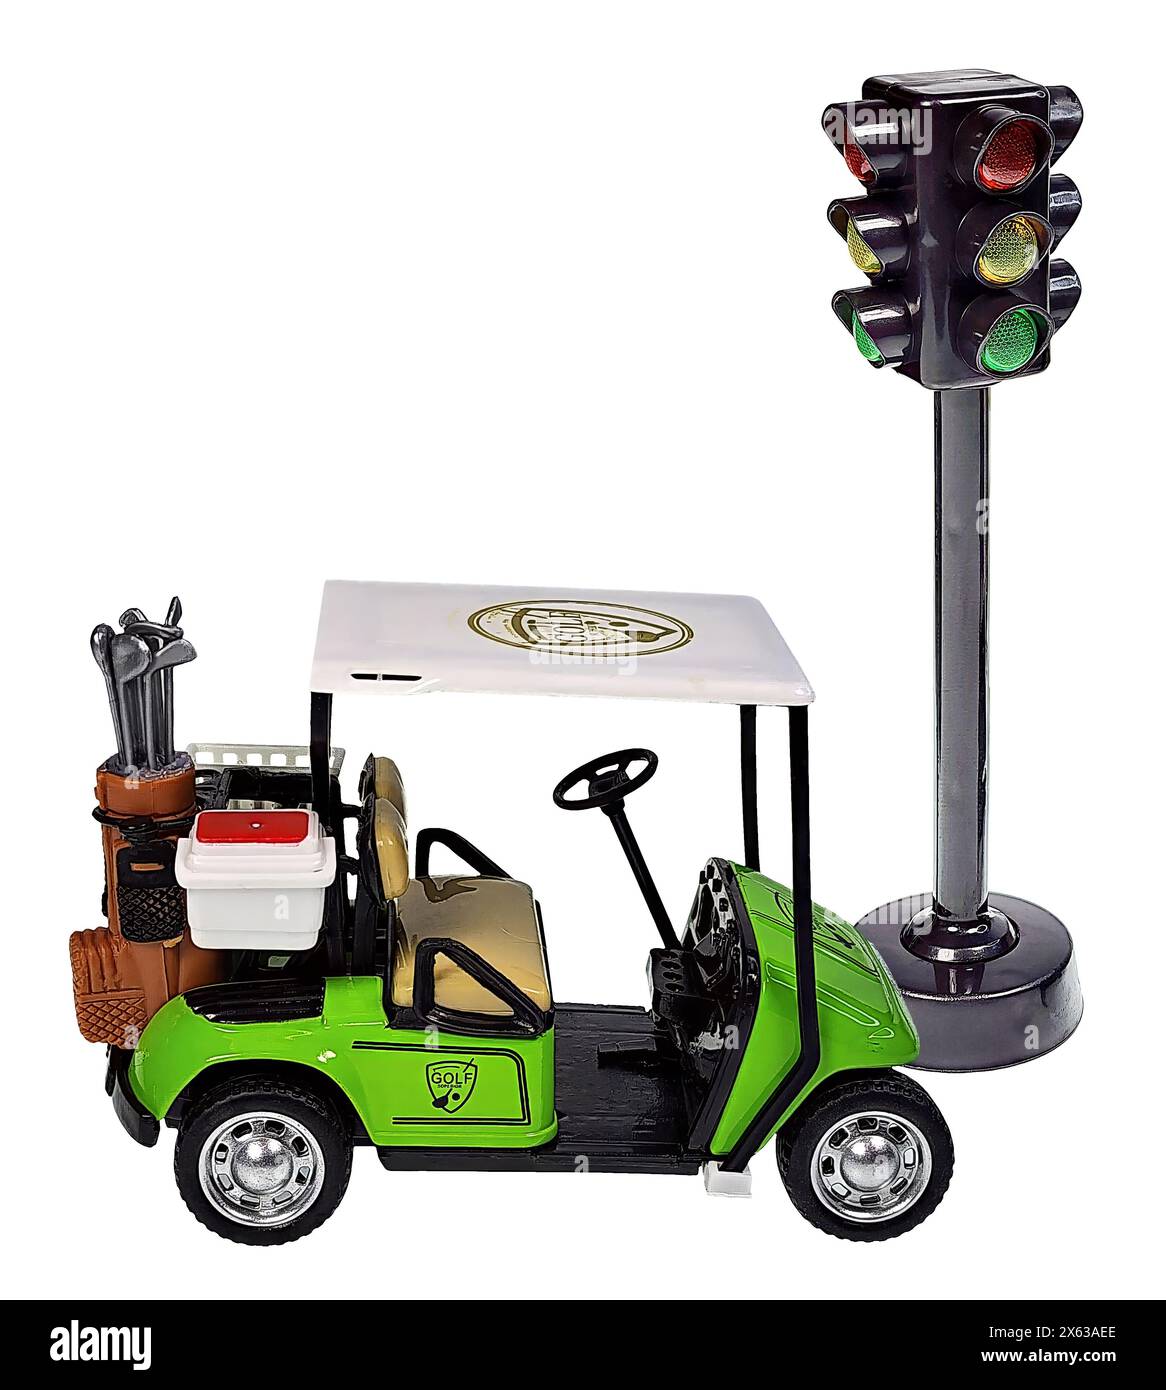 A golf cart used for transportation during a game of golf and a traffic light to show safety while playing Stock Photo